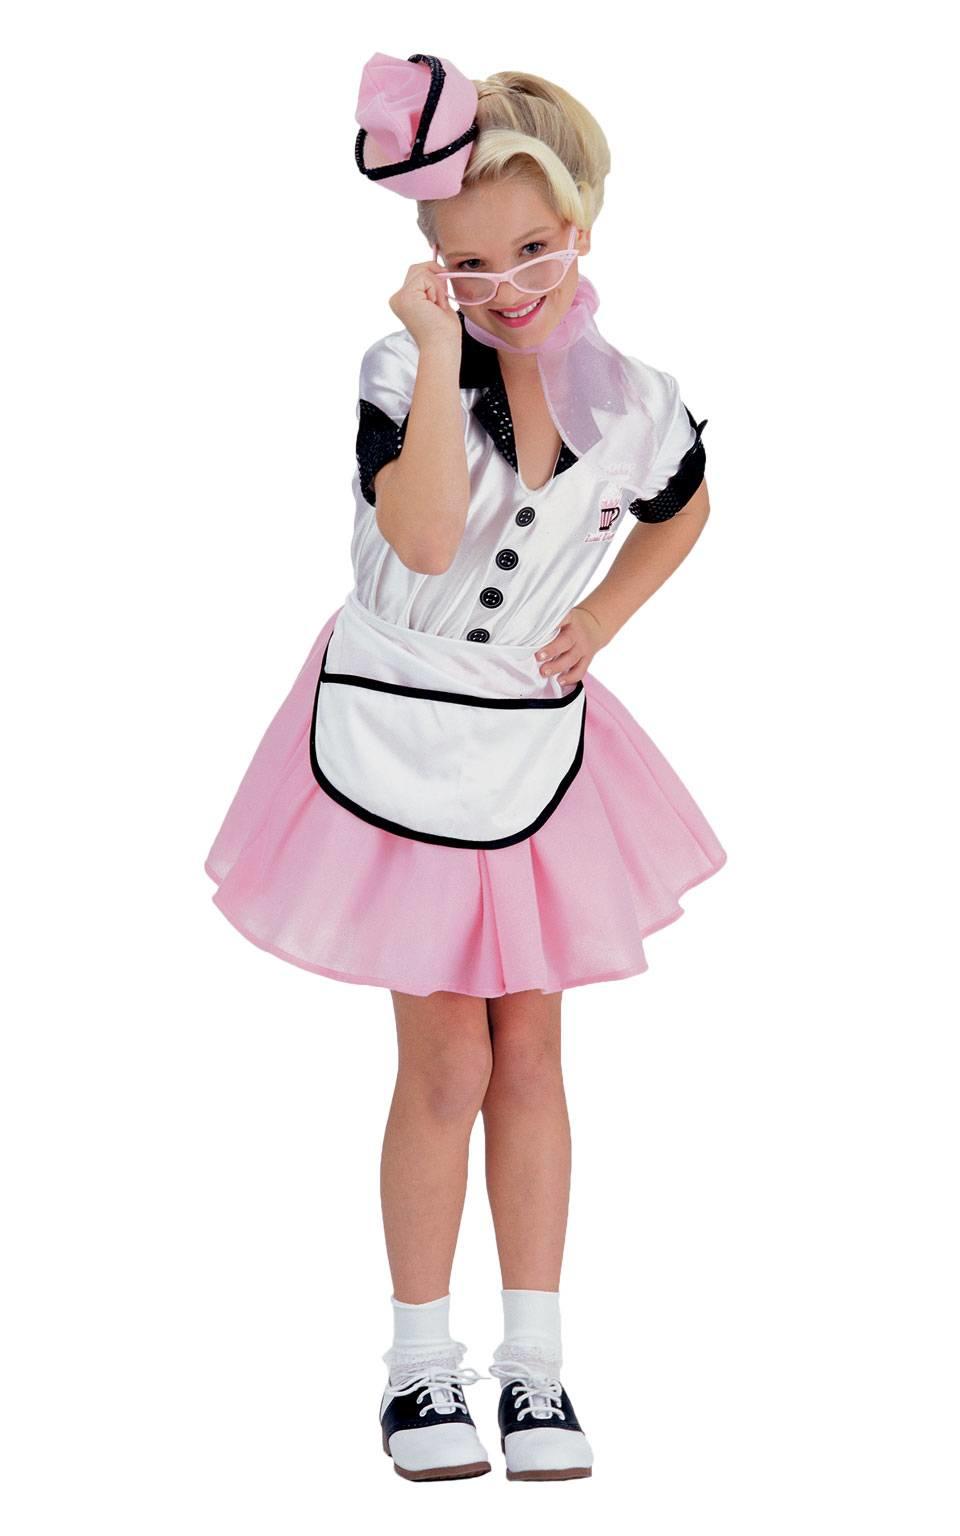 Soda Pop Girl's Fancy Dress Costume by Rubies 38734 available here at Karnival Costumes online party shop